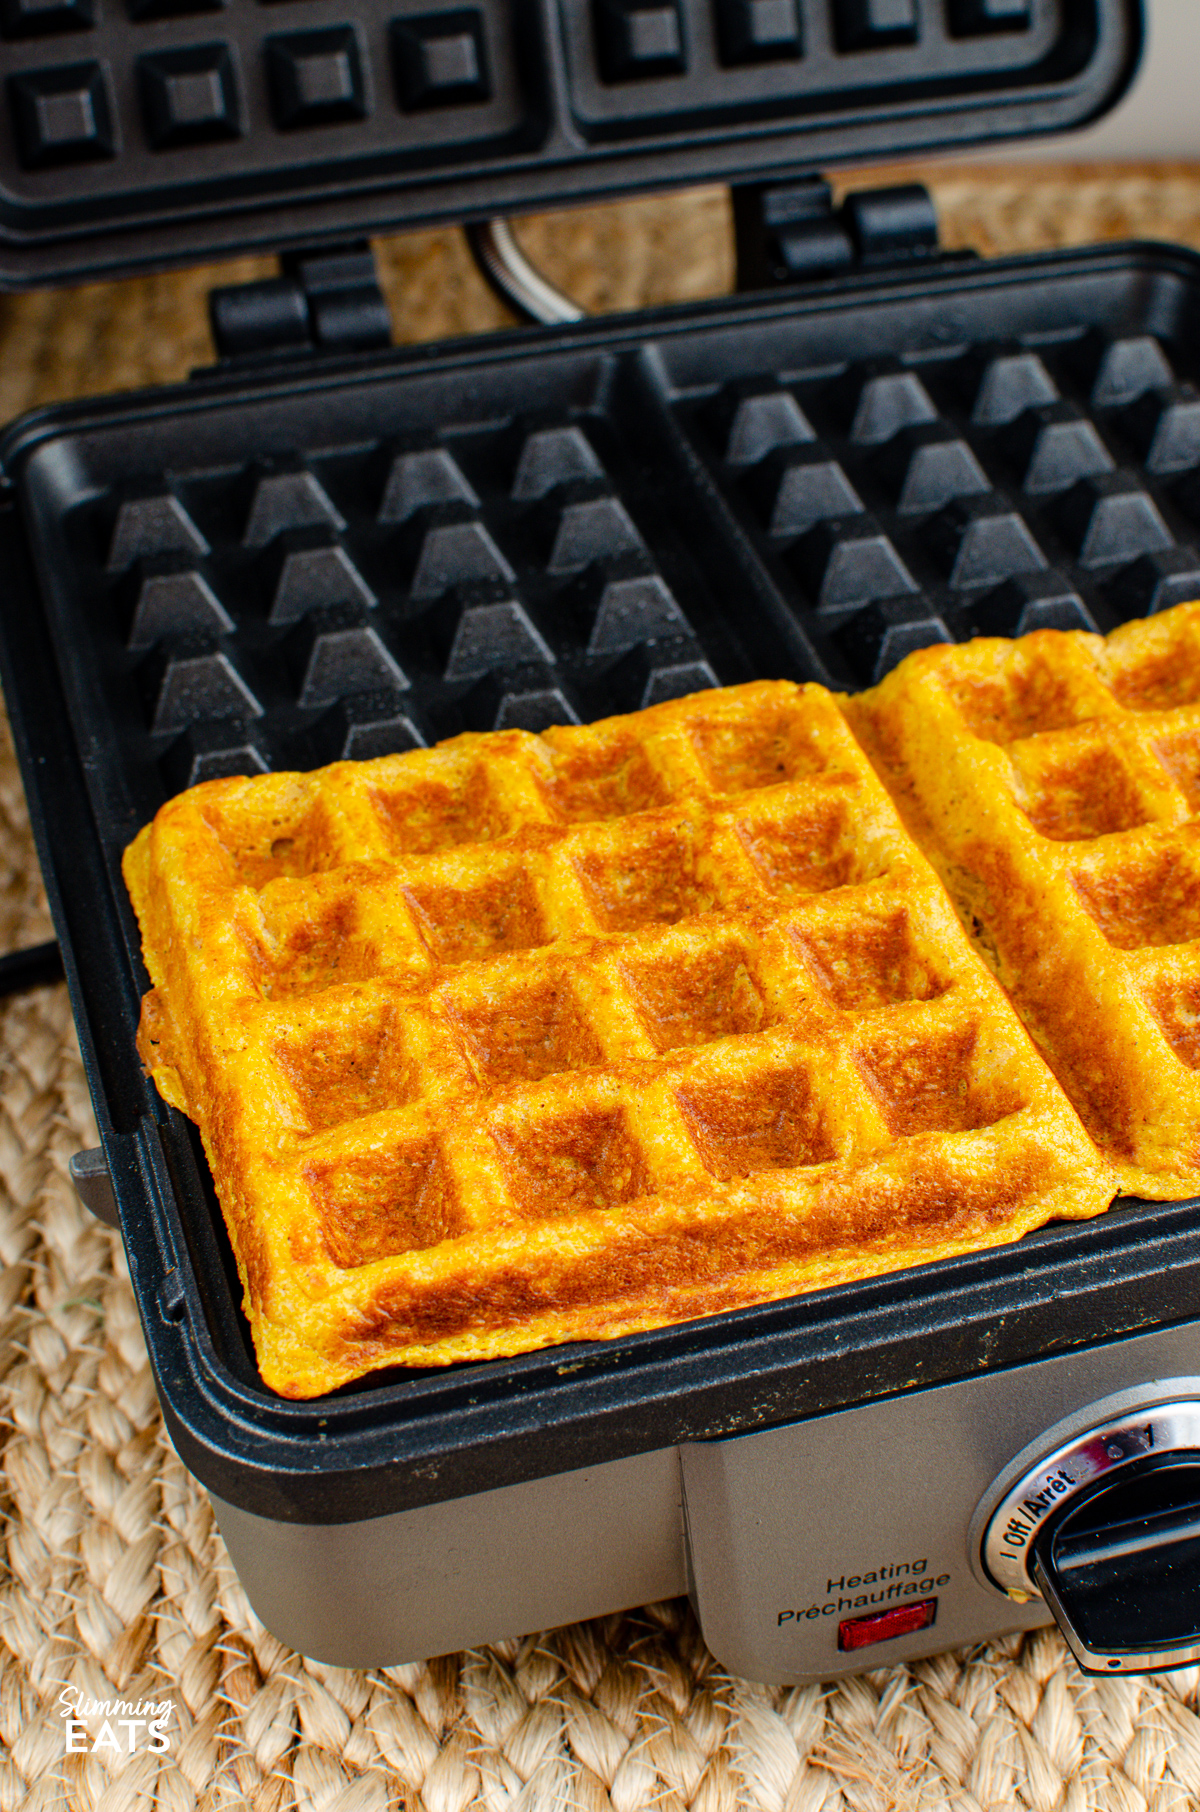 Perfectly cooked pumpkin waffles resting in a square waffle iron, showcasing their golden-brown exterior, ready to be served and enjoyed.